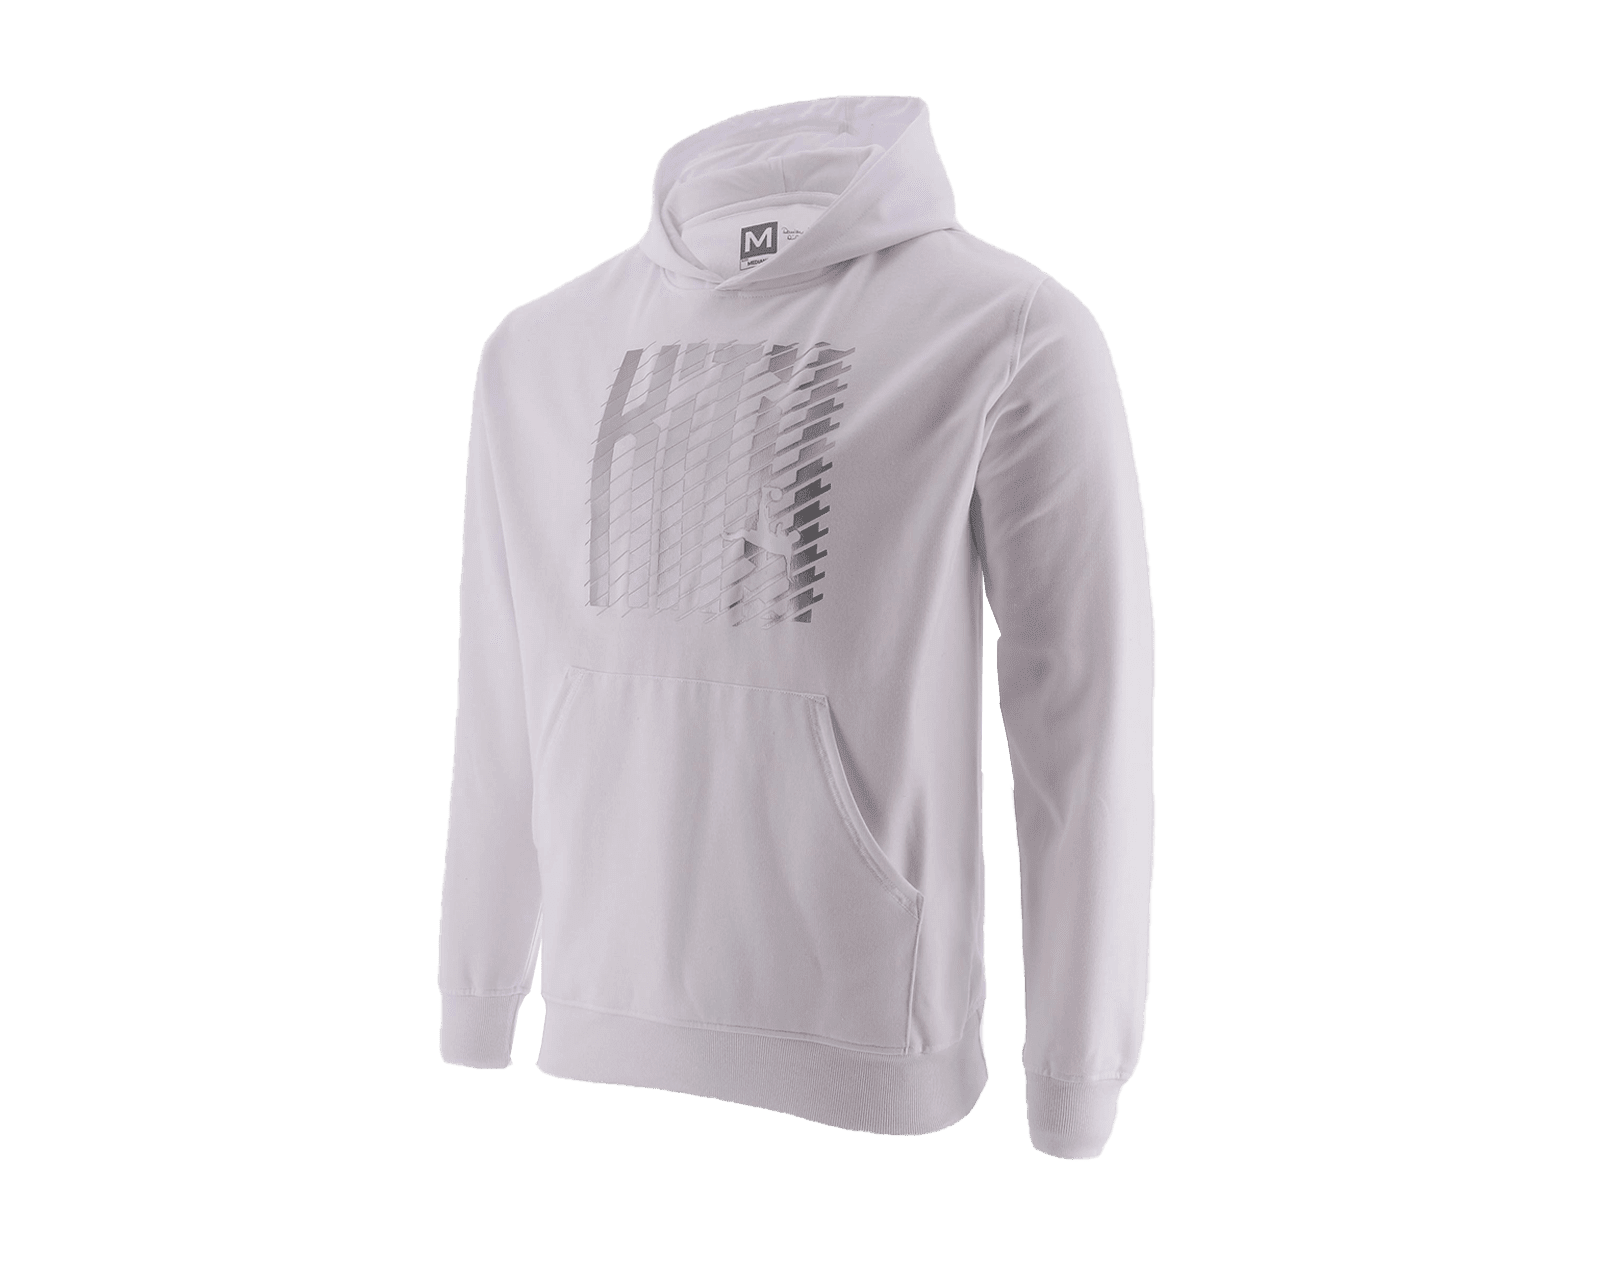 A white hoodie with pockets in the middle